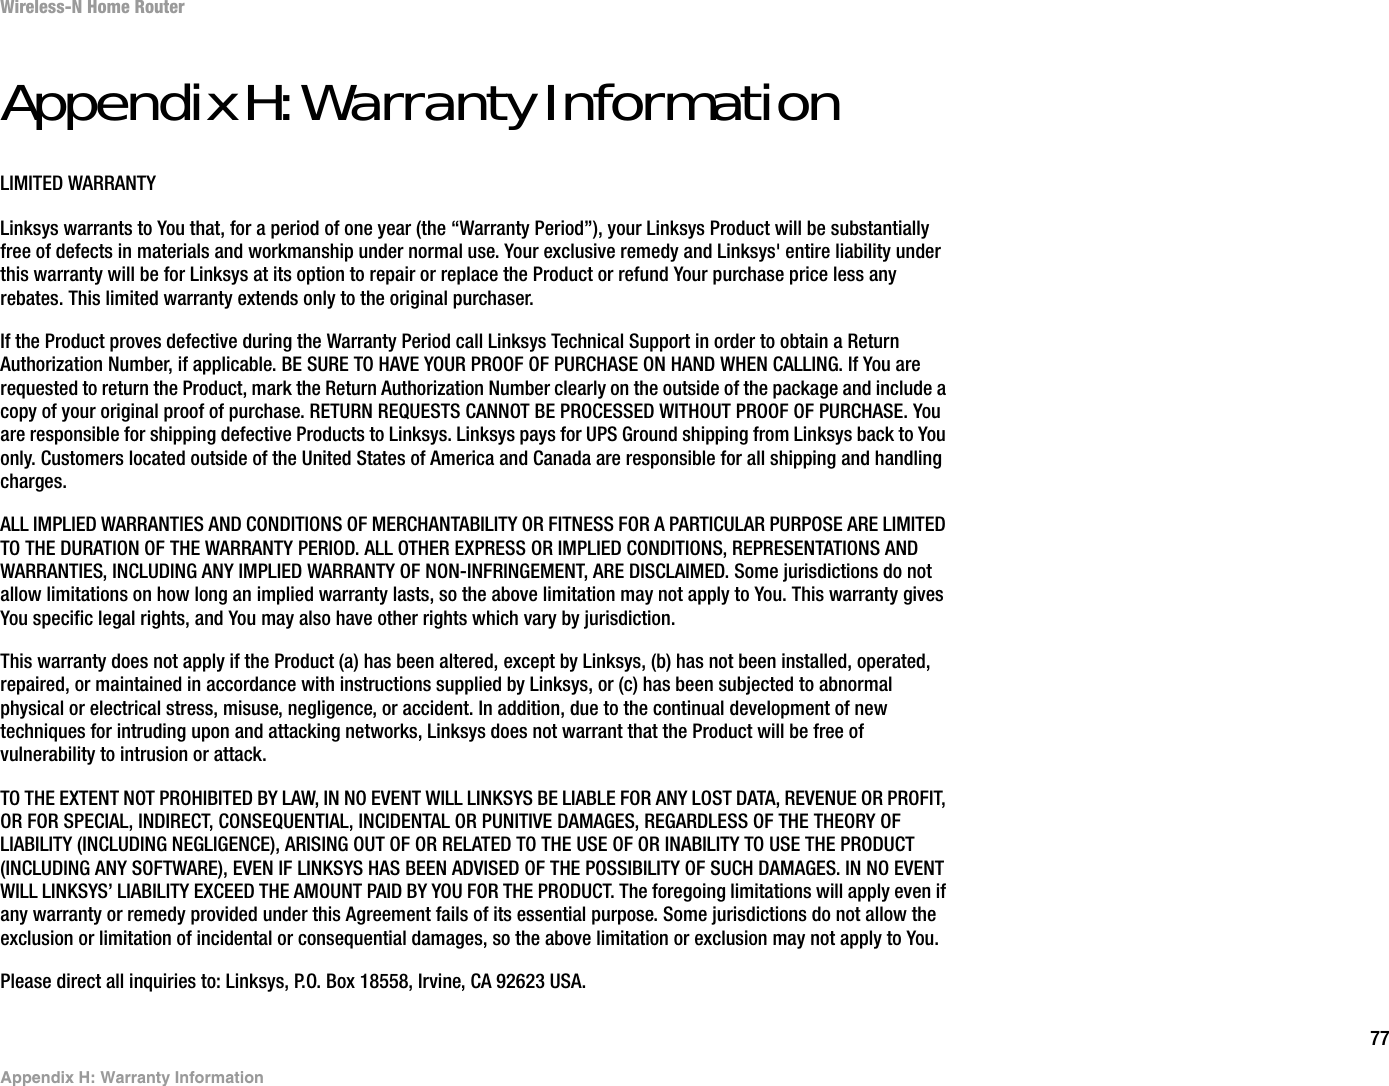 77Appendix H: Warranty InformationWireless-N Home RouterAppendix H: Warranty InformationLIMITED WARRANTYLinksys warrants to You that, for a period of one year (the “Warranty Period”), your Linksys Product will be substantially free of defects in materials and workmanship under normal use. Your exclusive remedy and Linksys&apos; entire liability under this warranty will be for Linksys at its option to repair or replace the Product or refund Your purchase price less any rebates. This limited warranty extends only to the original purchaser. If the Product proves defective during the Warranty Period call Linksys Technical Support in order to obtain a Return Authorization Number, if applicable. BE SURE TO HAVE YOUR PROOF OF PURCHASE ON HAND WHEN CALLING. If You are requested to return the Product, mark the Return Authorization Number clearly on the outside of the package and include a copy of your original proof of purchase. RETURN REQUESTS CANNOT BE PROCESSED WITHOUT PROOF OF PURCHASE. You are responsible for shipping defective Products to Linksys. Linksys pays for UPS Ground shipping from Linksys back to You only. Customers located outside of the United States of America and Canada are responsible for all shipping and handling charges. ALL IMPLIED WARRANTIES AND CONDITIONS OF MERCHANTABILITY OR FITNESS FOR A PARTICULAR PURPOSE ARE LIMITED TO THE DURATION OF THE WARRANTY PERIOD. ALL OTHER EXPRESS OR IMPLIED CONDITIONS, REPRESENTATIONS AND WARRANTIES, INCLUDING ANY IMPLIED WARRANTY OF NON-INFRINGEMENT, ARE DISCLAIMED. Some jurisdictions do not allow limitations on how long an implied warranty lasts, so the above limitation may not apply to You. This warranty gives You specific legal rights, and You may also have other rights which vary by jurisdiction.This warranty does not apply if the Product (a) has been altered, except by Linksys, (b) has not been installed, operated, repaired, or maintained in accordance with instructions supplied by Linksys, or (c) has been subjected to abnormal physical or electrical stress, misuse, negligence, or accident. In addition, due to the continual development of new techniques for intruding upon and attacking networks, Linksys does not warrant that the Product will be free of vulnerability to intrusion or attack.TO THE EXTENT NOT PROHIBITED BY LAW, IN NO EVENT WILL LINKSYS BE LIABLE FOR ANY LOST DATA, REVENUE OR PROFIT, OR FOR SPECIAL, INDIRECT, CONSEQUENTIAL, INCIDENTAL OR PUNITIVE DAMAGES, REGARDLESS OF THE THEORY OF LIABILITY (INCLUDING NEGLIGENCE), ARISING OUT OF OR RELATED TO THE USE OF OR INABILITY TO USE THE PRODUCT (INCLUDING ANY SOFTWARE), EVEN IF LINKSYS HAS BEEN ADVISED OF THE POSSIBILITY OF SUCH DAMAGES. IN NO EVENT WILL LINKSYS’ LIABILITY EXCEED THE AMOUNT PAID BY YOU FOR THE PRODUCT. The foregoing limitations will apply even if any warranty or remedy provided under this Agreement fails of its essential purpose. Some jurisdictions do not allow the exclusion or limitation of incidental or consequential damages, so the above limitation or exclusion may not apply to You.Please direct all inquiries to: Linksys, P.O. Box 18558, Irvine, CA 92623 USA.